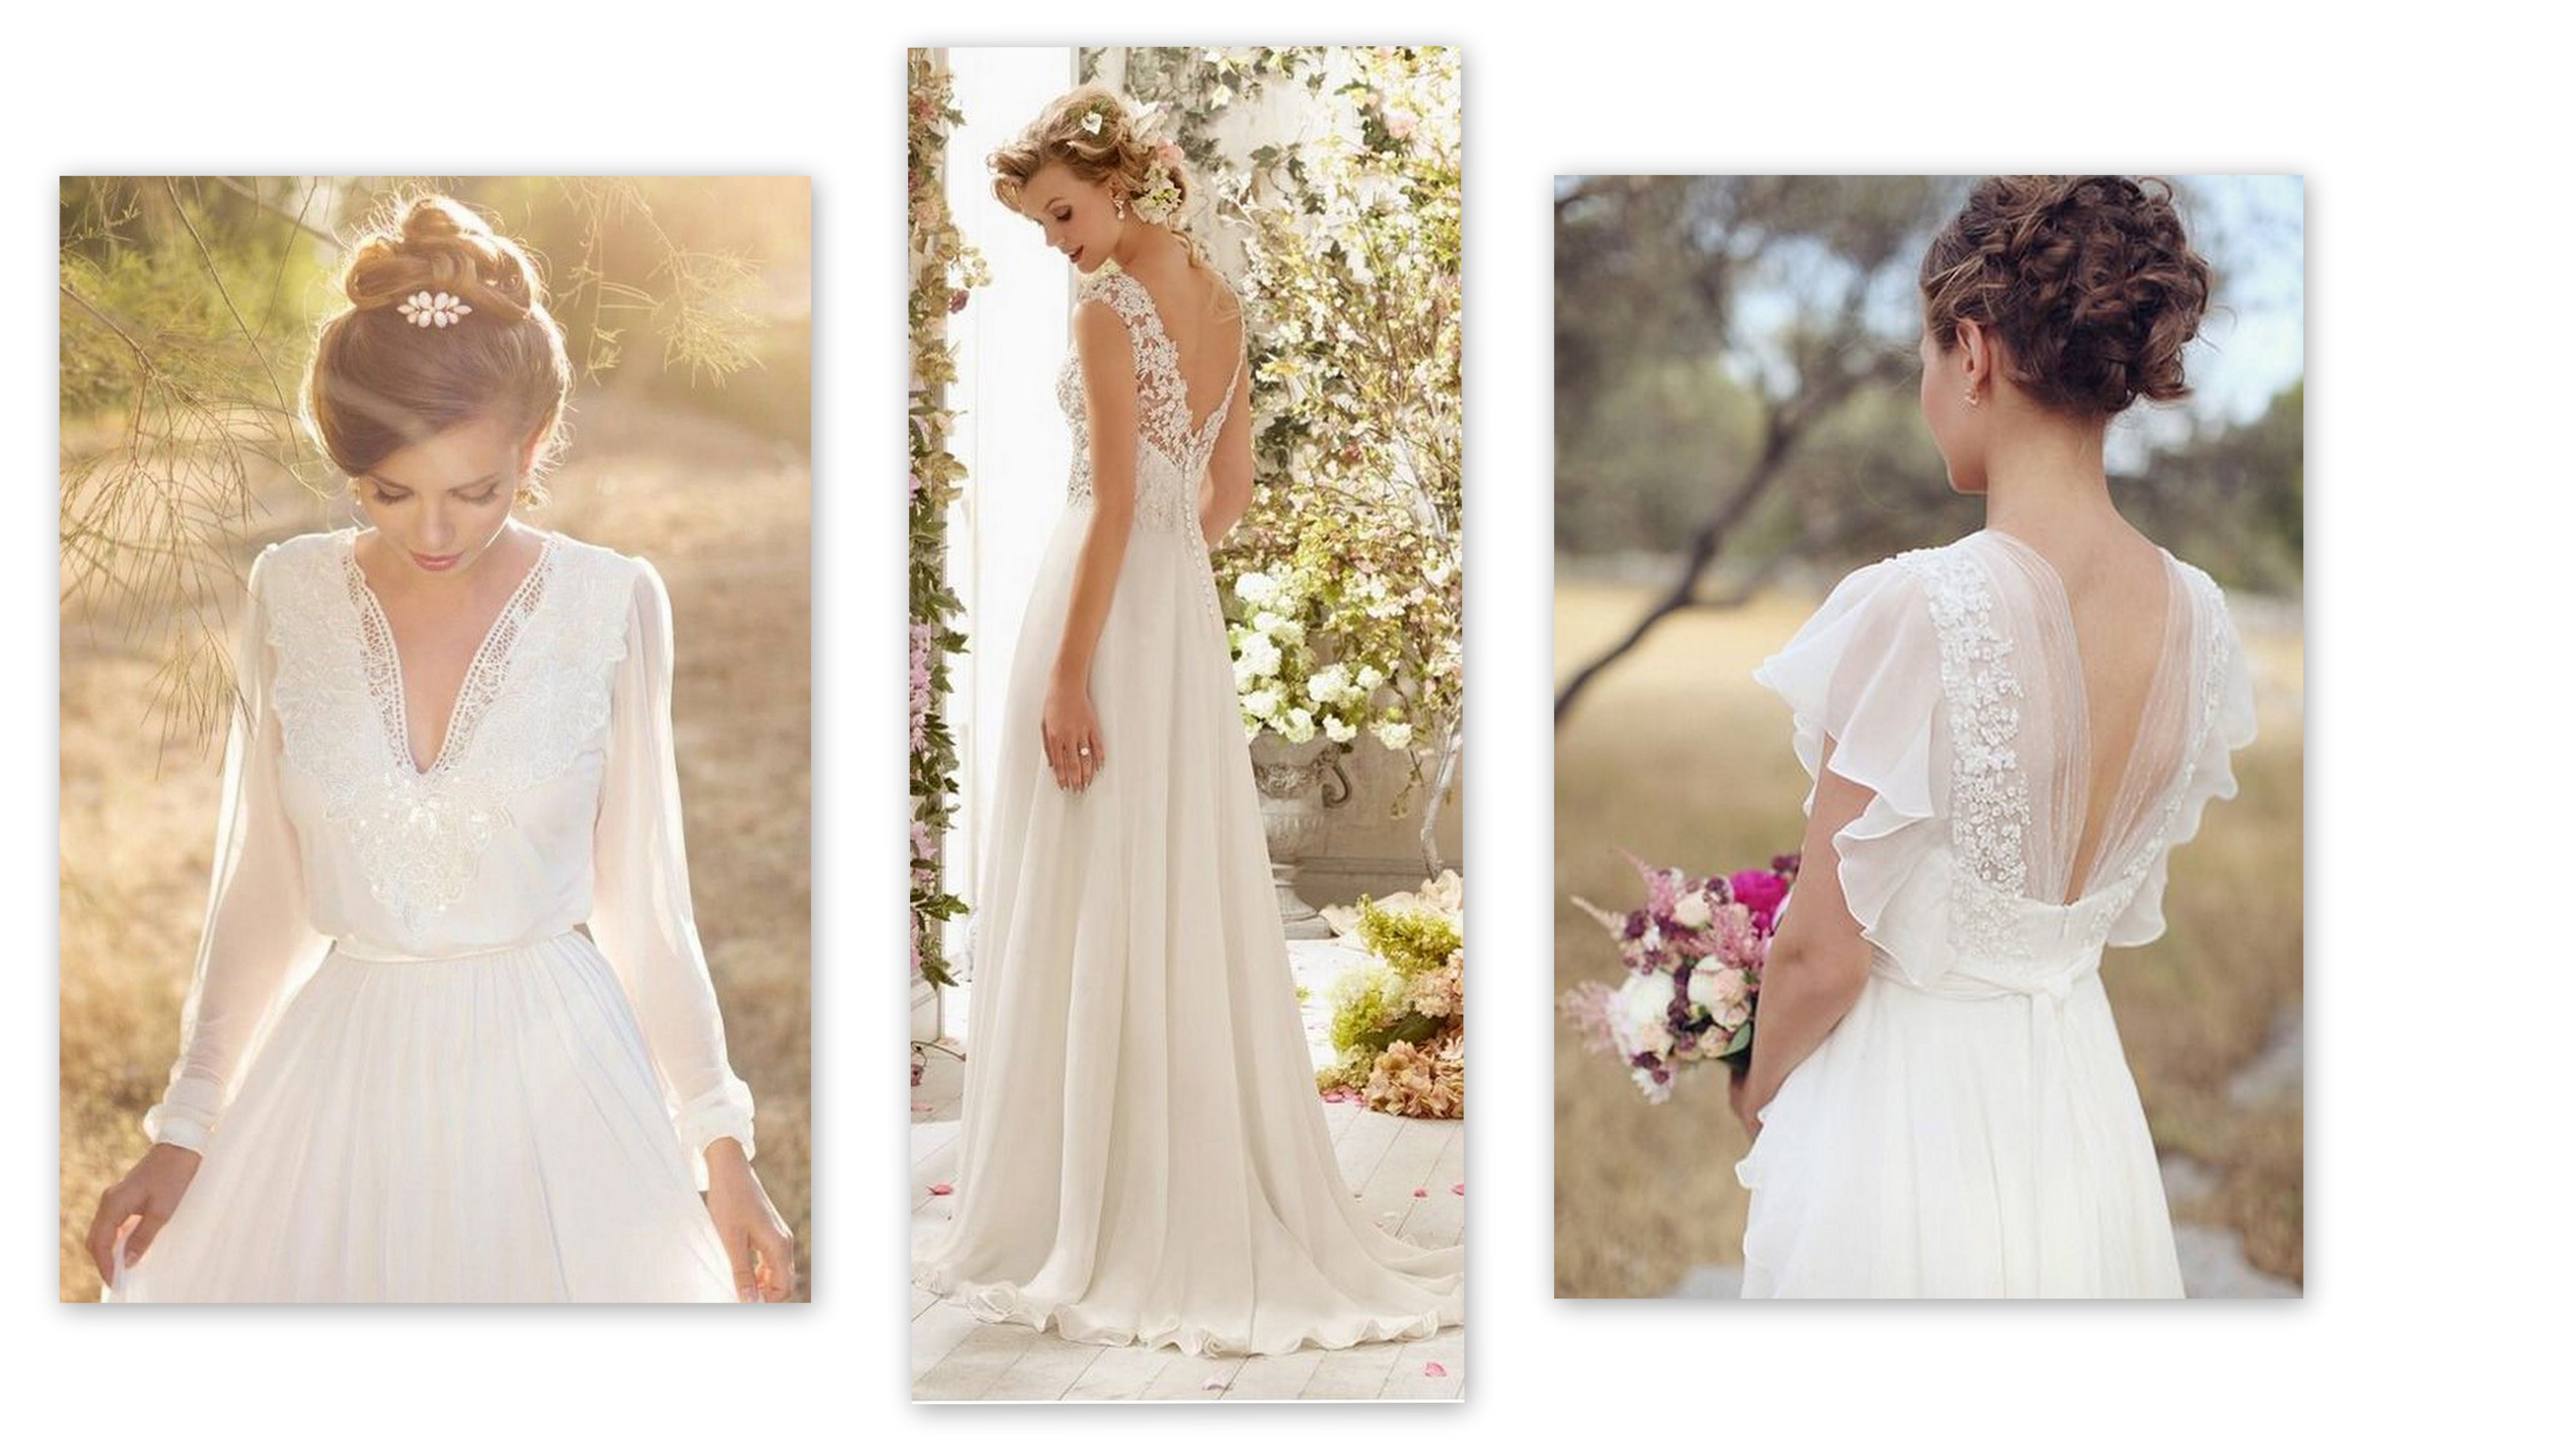 How To Choose The Best Wedding Gown To Suit Your Body Type